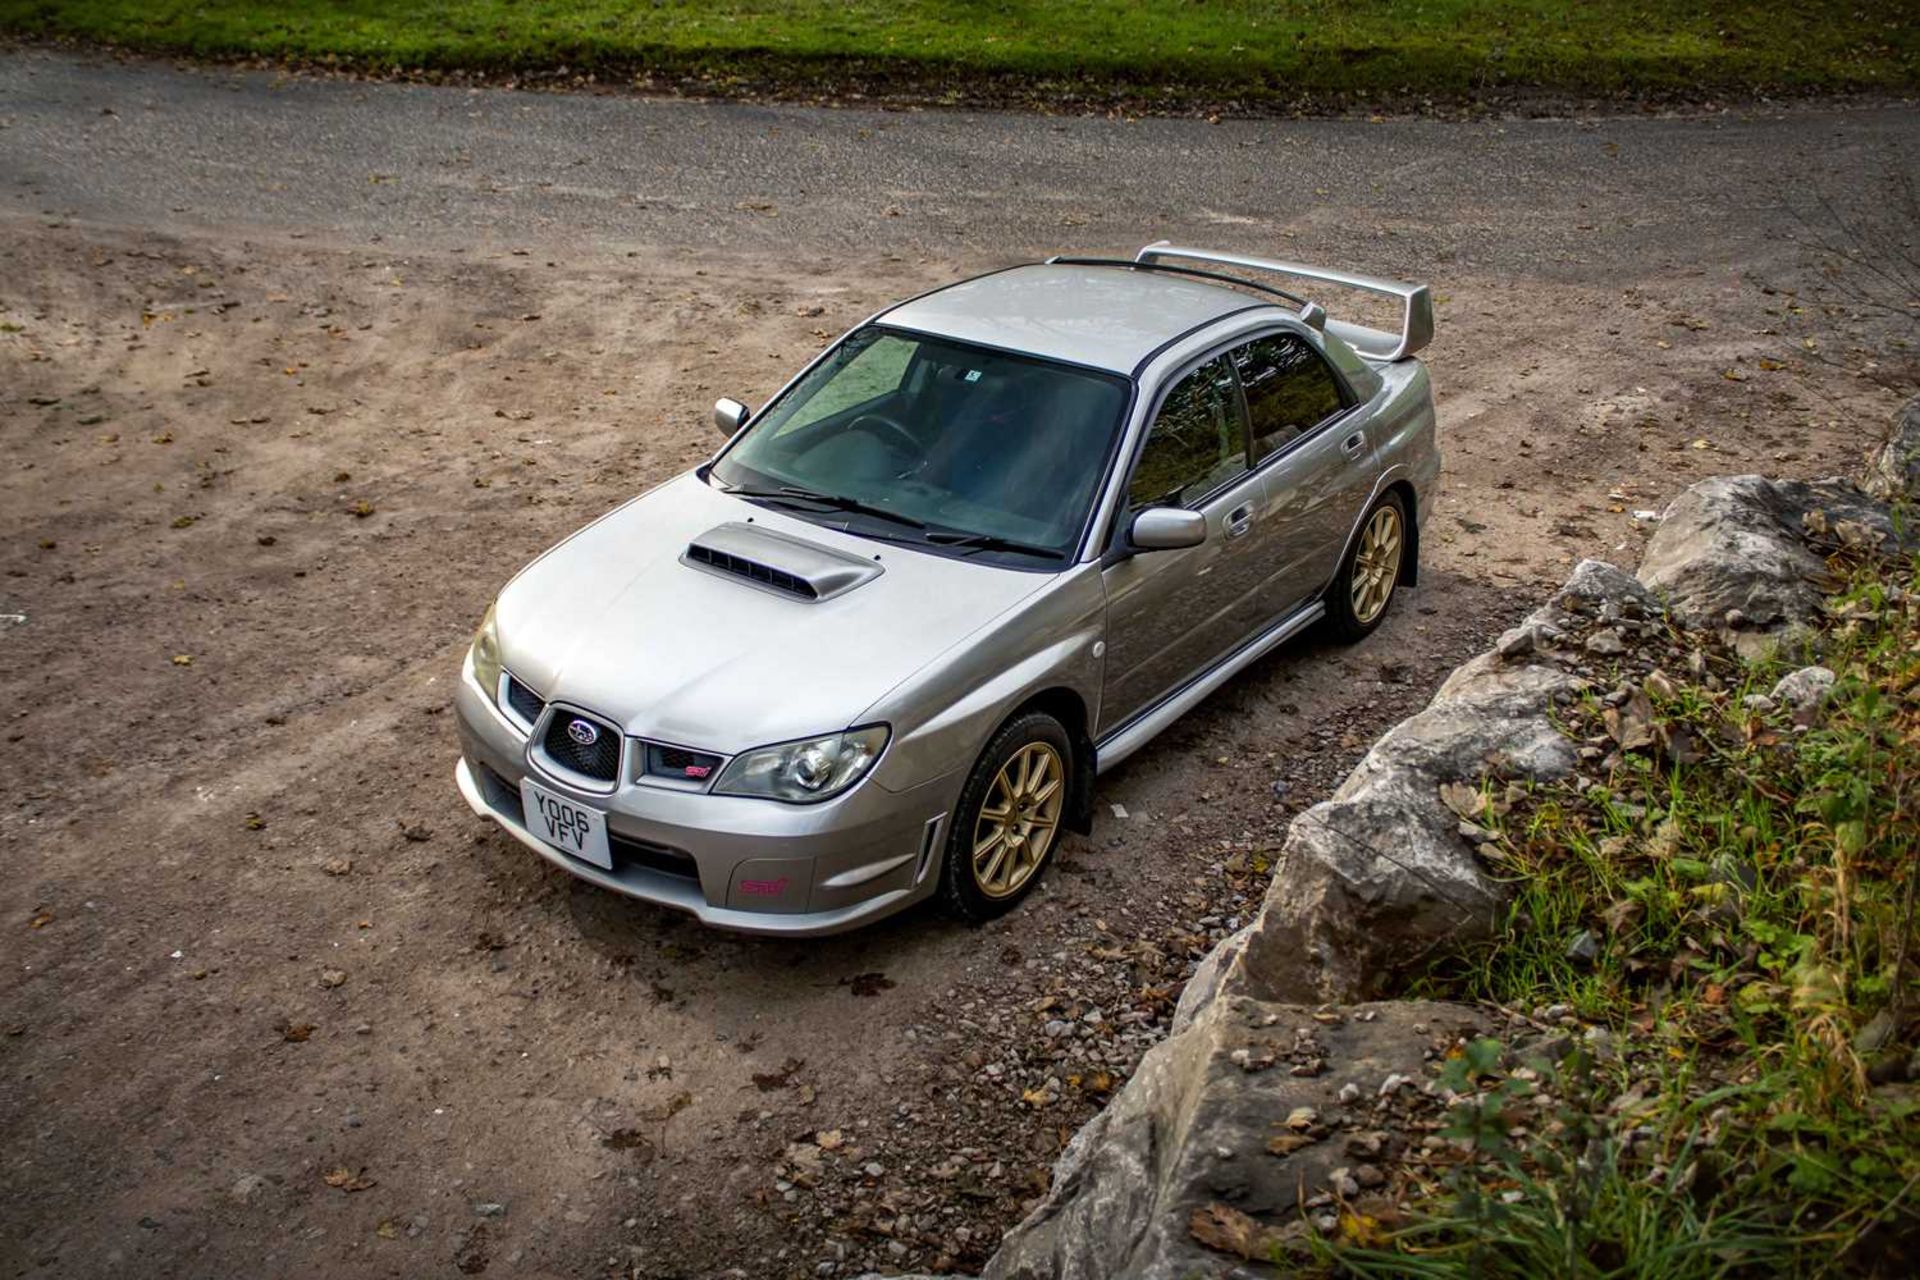 2006 Subaru Impreza WRX STi Featuring a plethora of desirable upgrades, supported by a dyno printout - Image 7 of 103